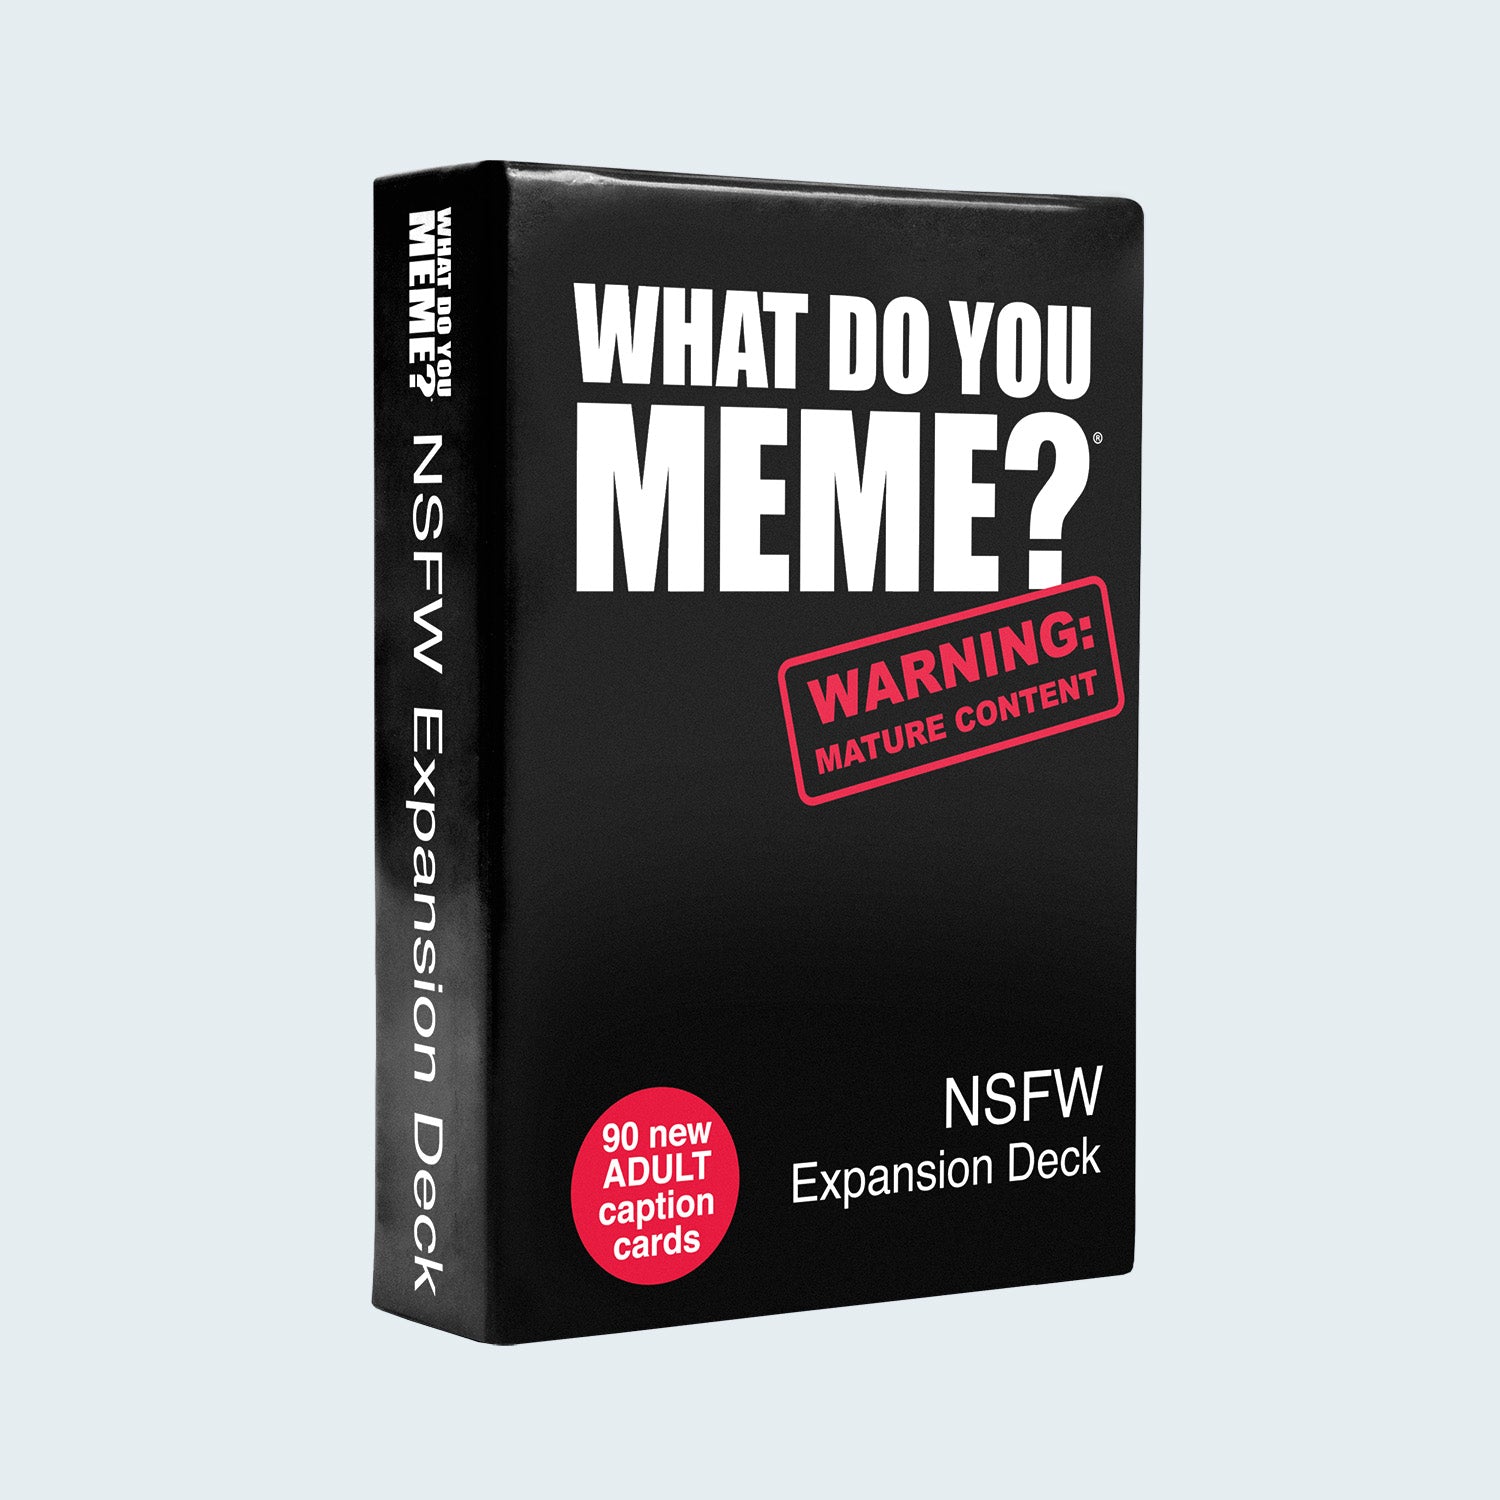 nsfw-expansion-pack-game-box-and-game-play-02-what-do-you-meme-by-relatable